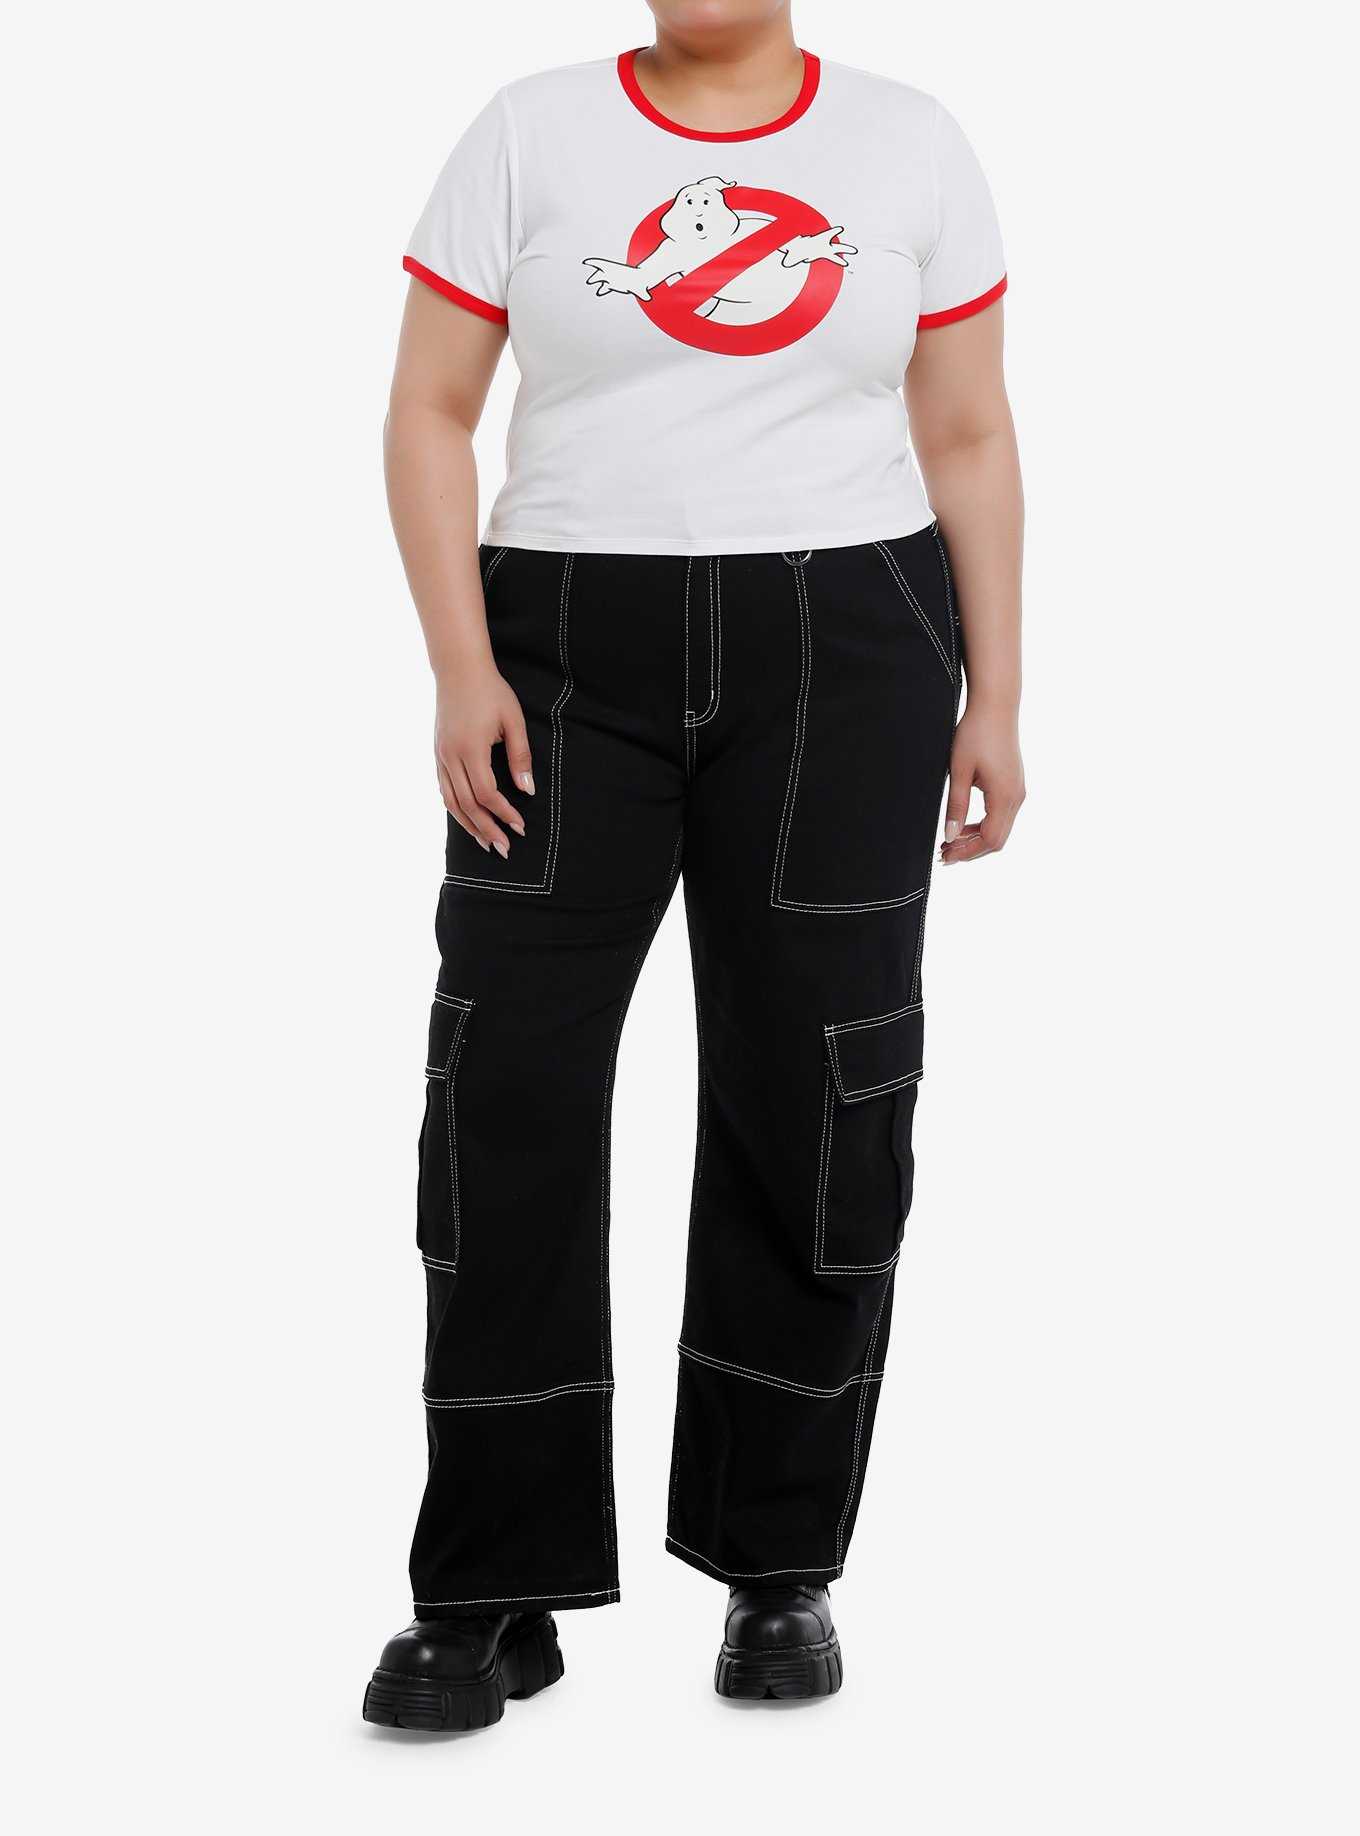 Her Universe Ghostbusters Logo Glow-In-The-Dark Girls Baby Ringer T-Shirt Plus Size, , hi-res